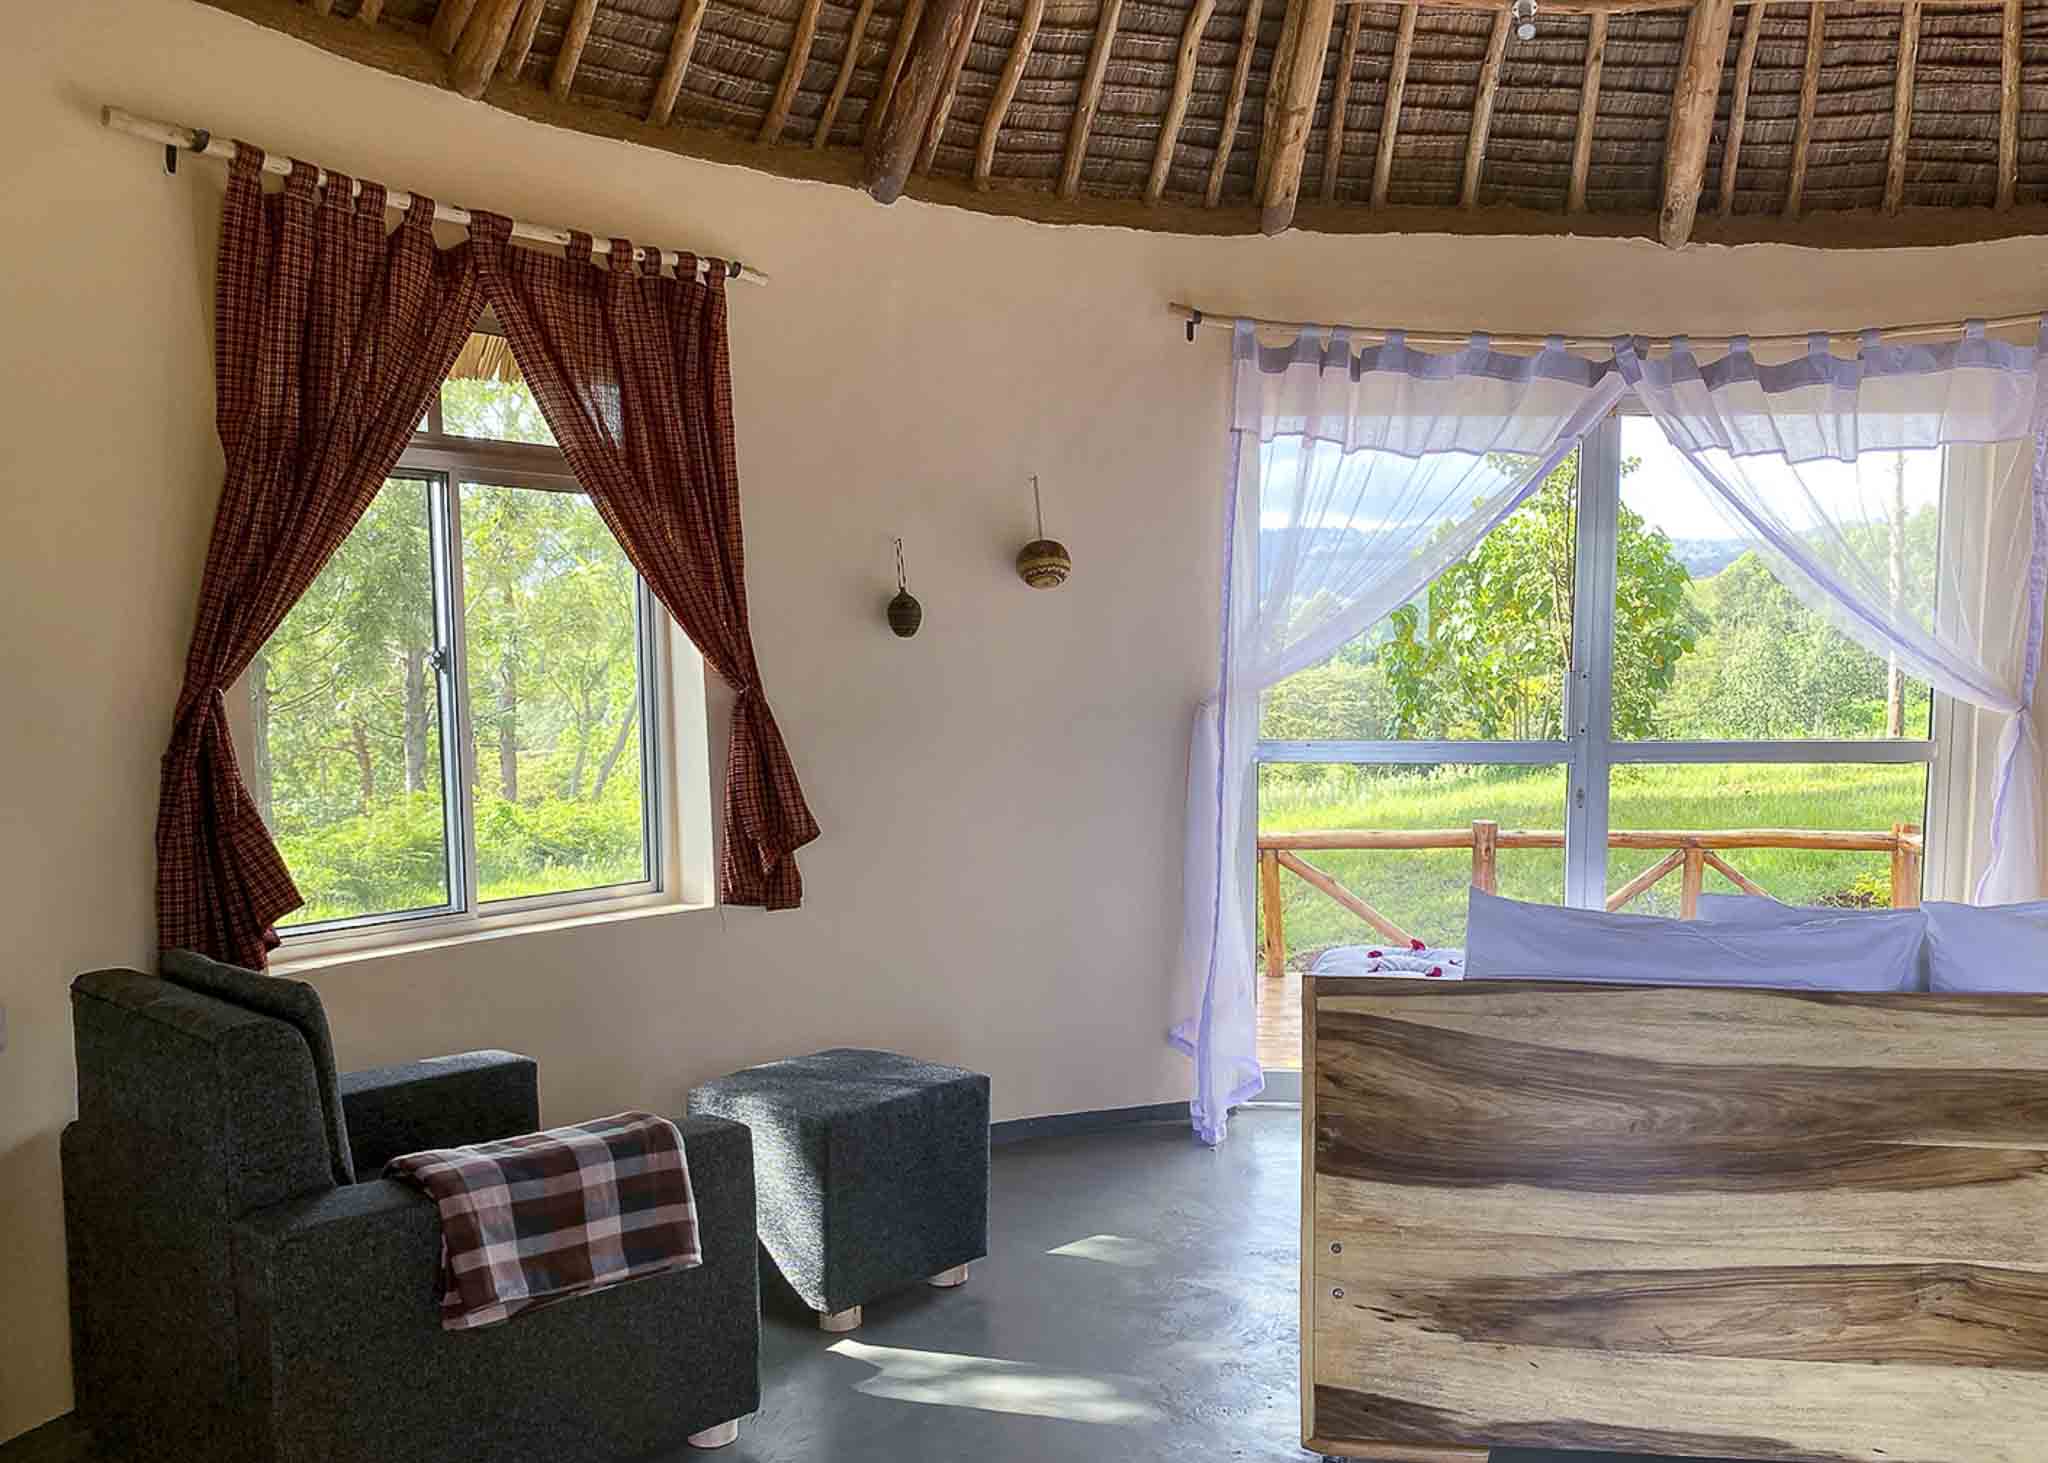 Foresight Eco Lodge Bungalow - Room